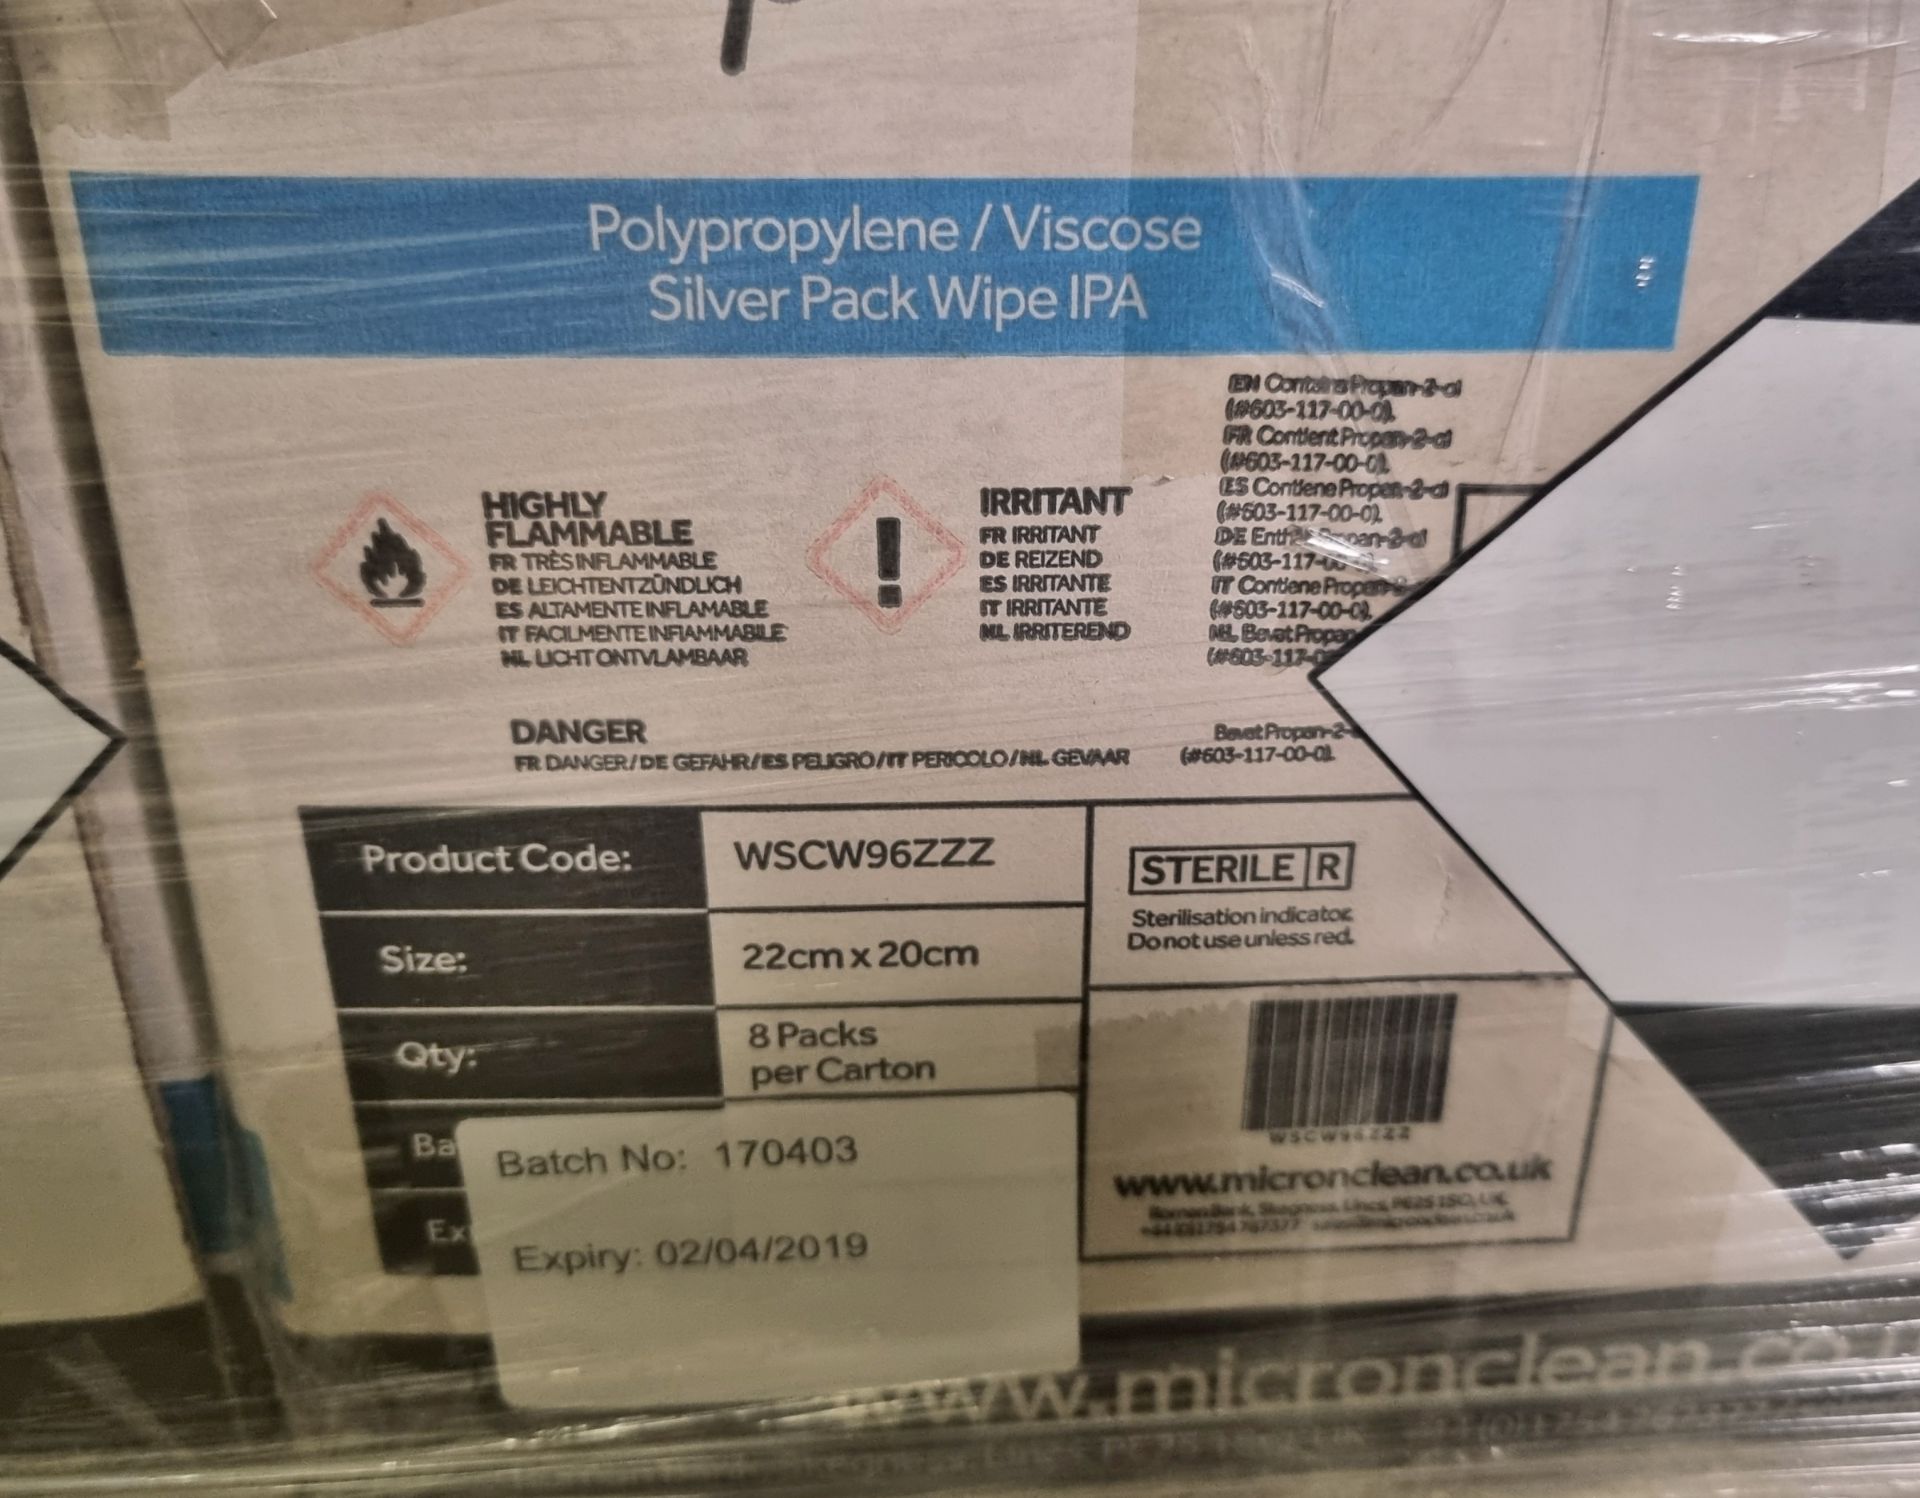 39x boxes of Veriguard9 WSC296ZZZ polypropylene / viscose silver pack wipe IPA - 200x8 per box - Image 3 of 4